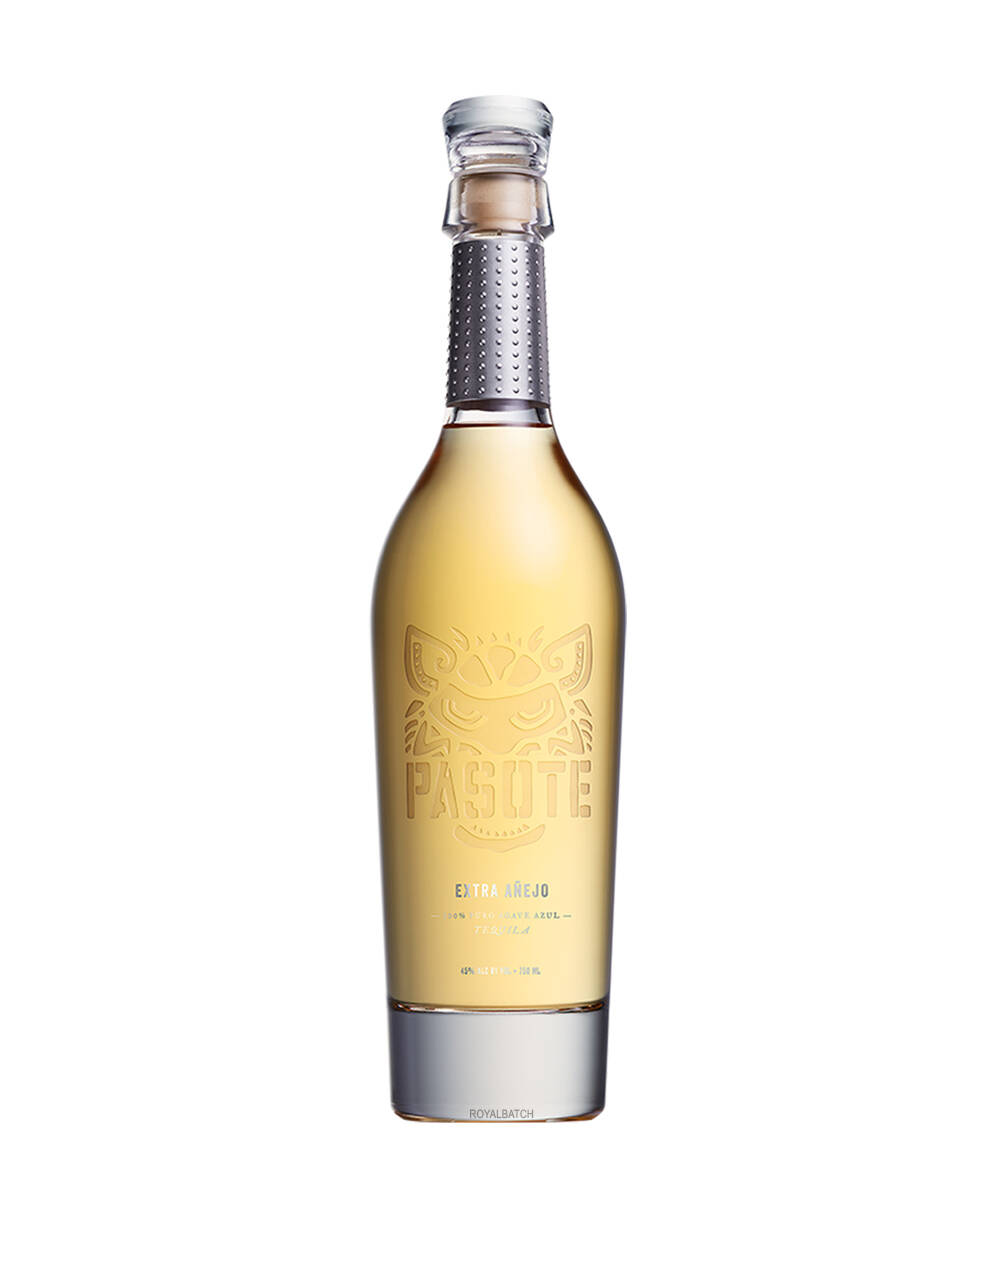 PASOTE EXTRA ANEJO TEQUILA